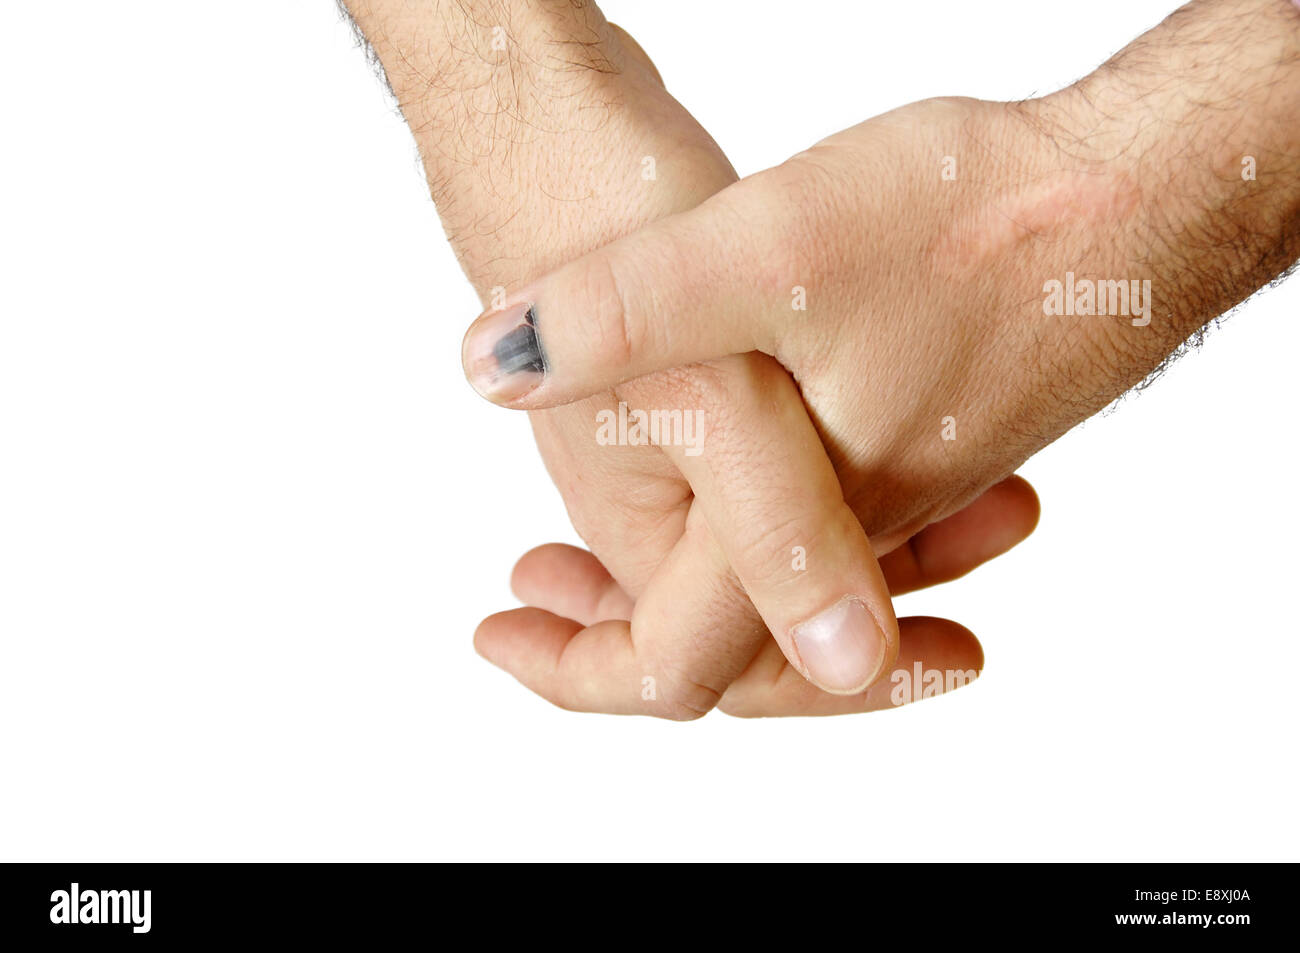 Manual workers hands Stock Photo